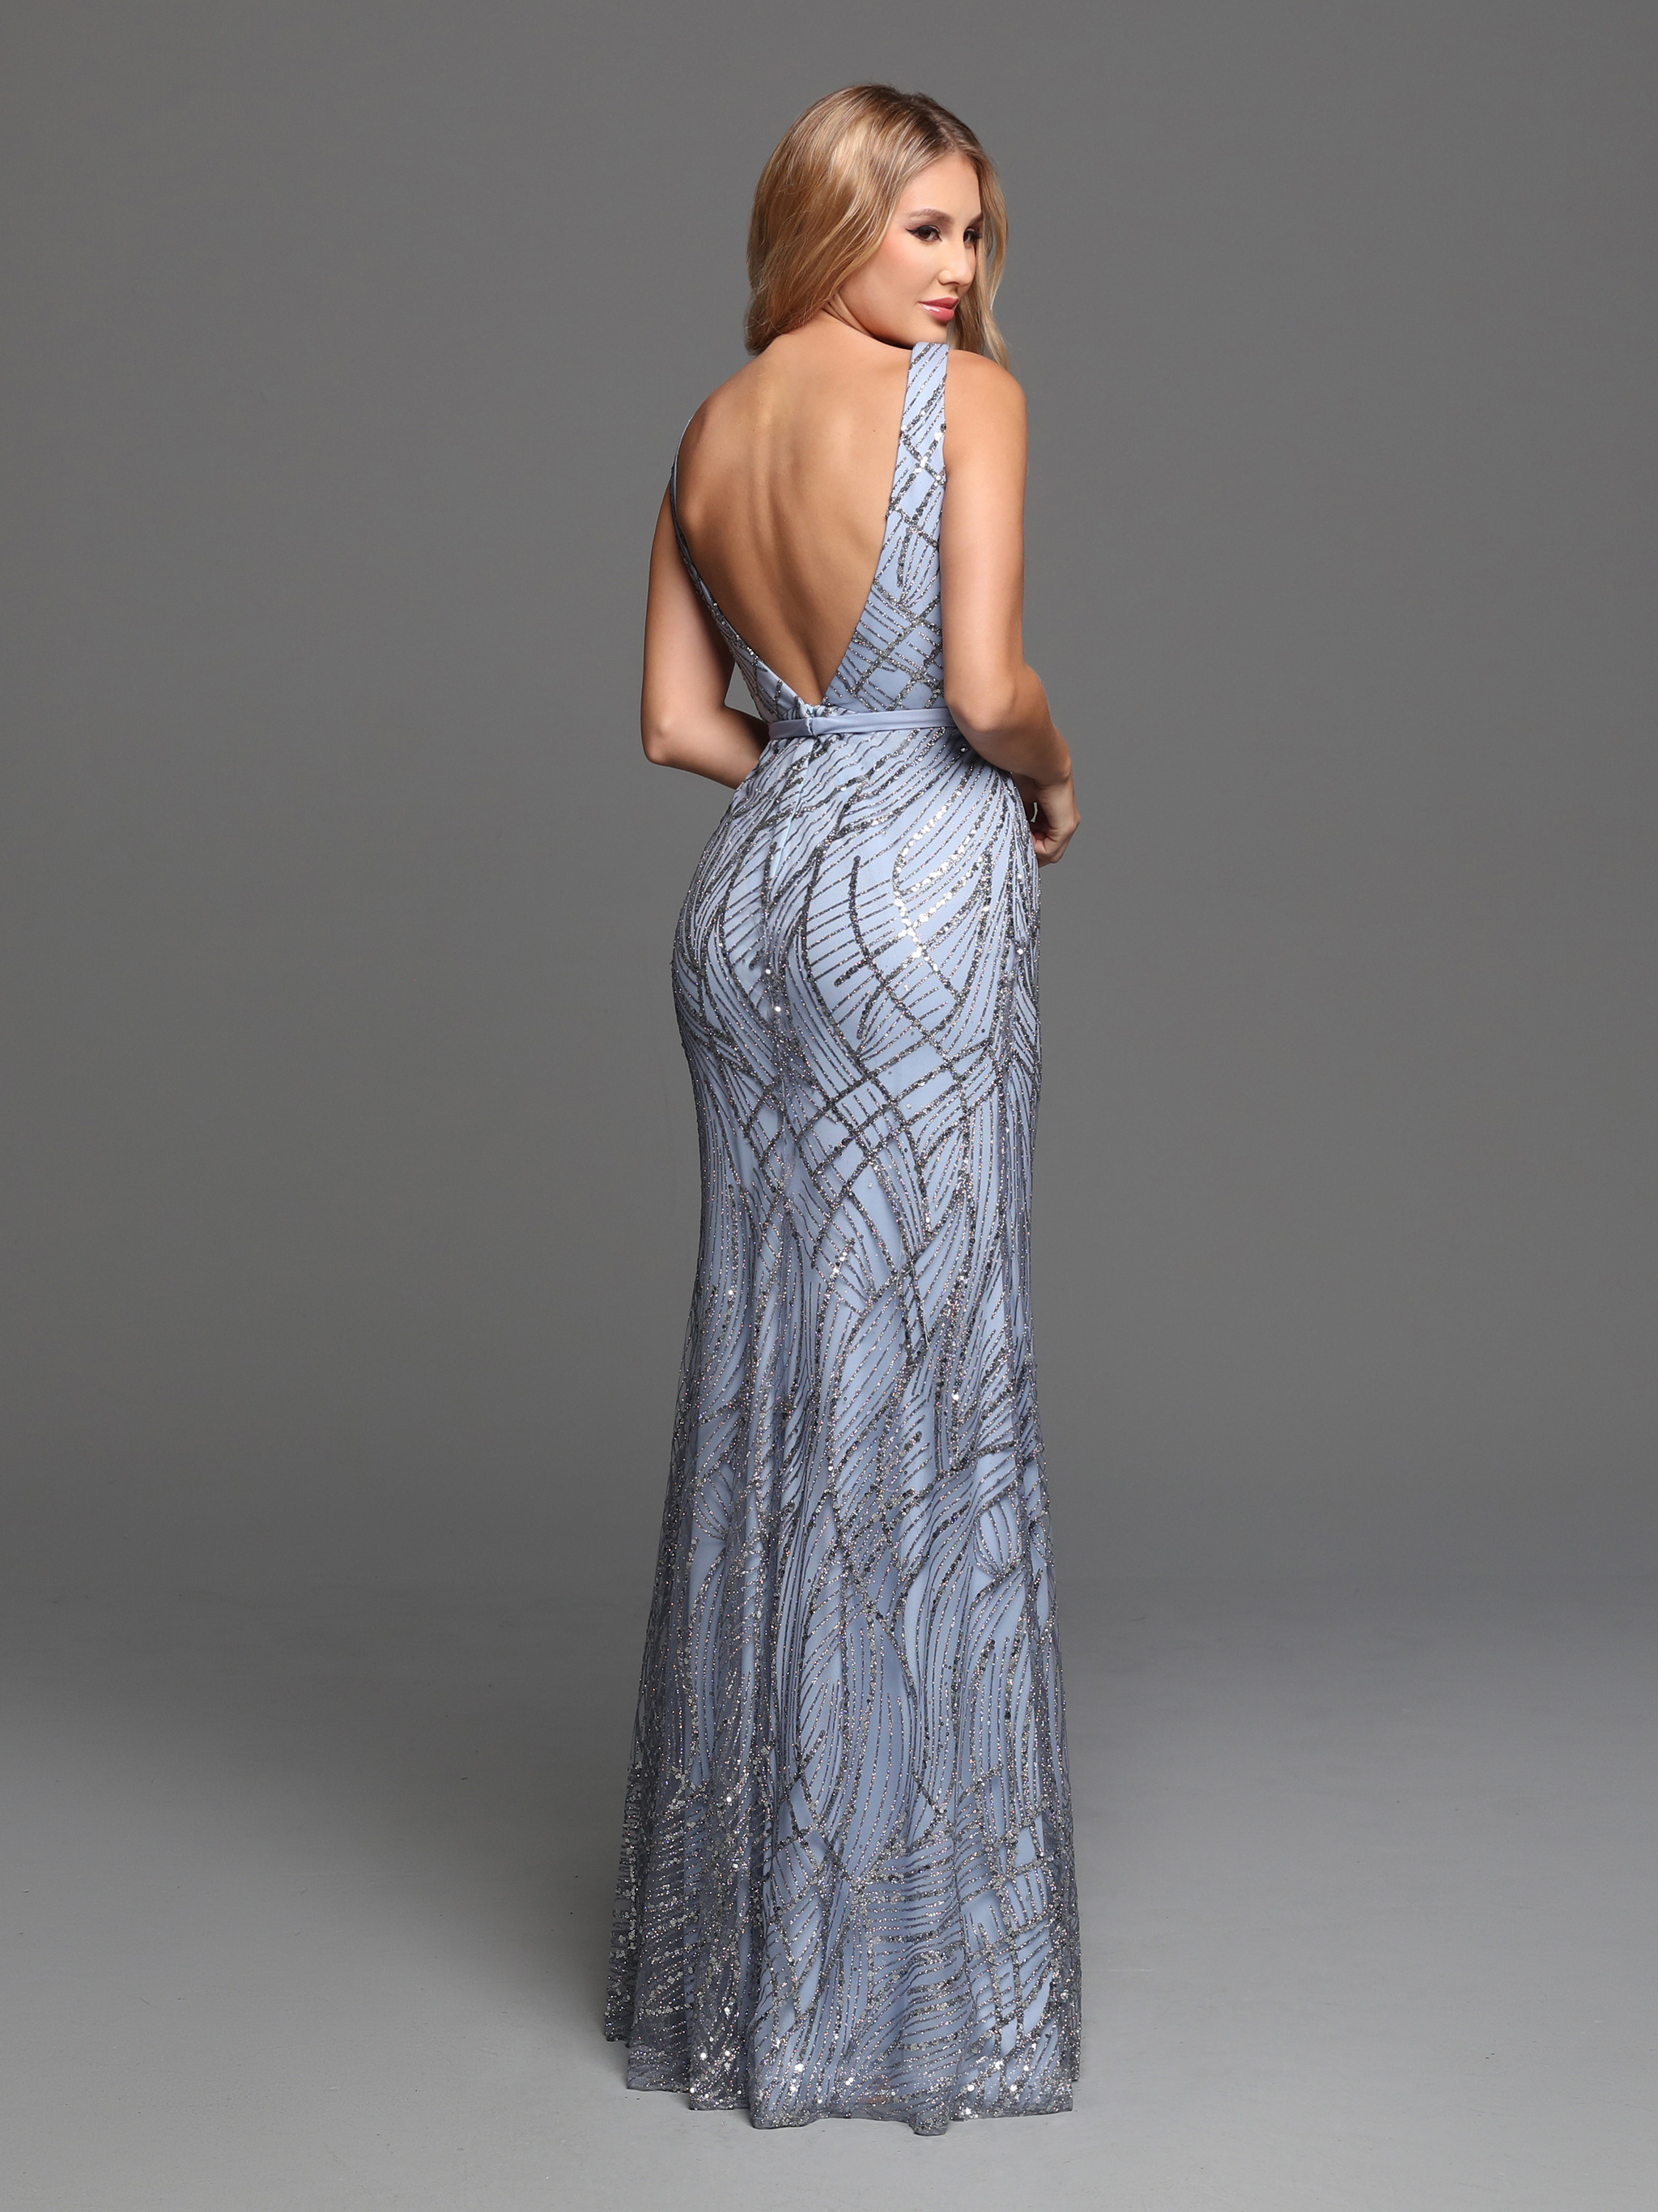 Image showing back view of style #72232